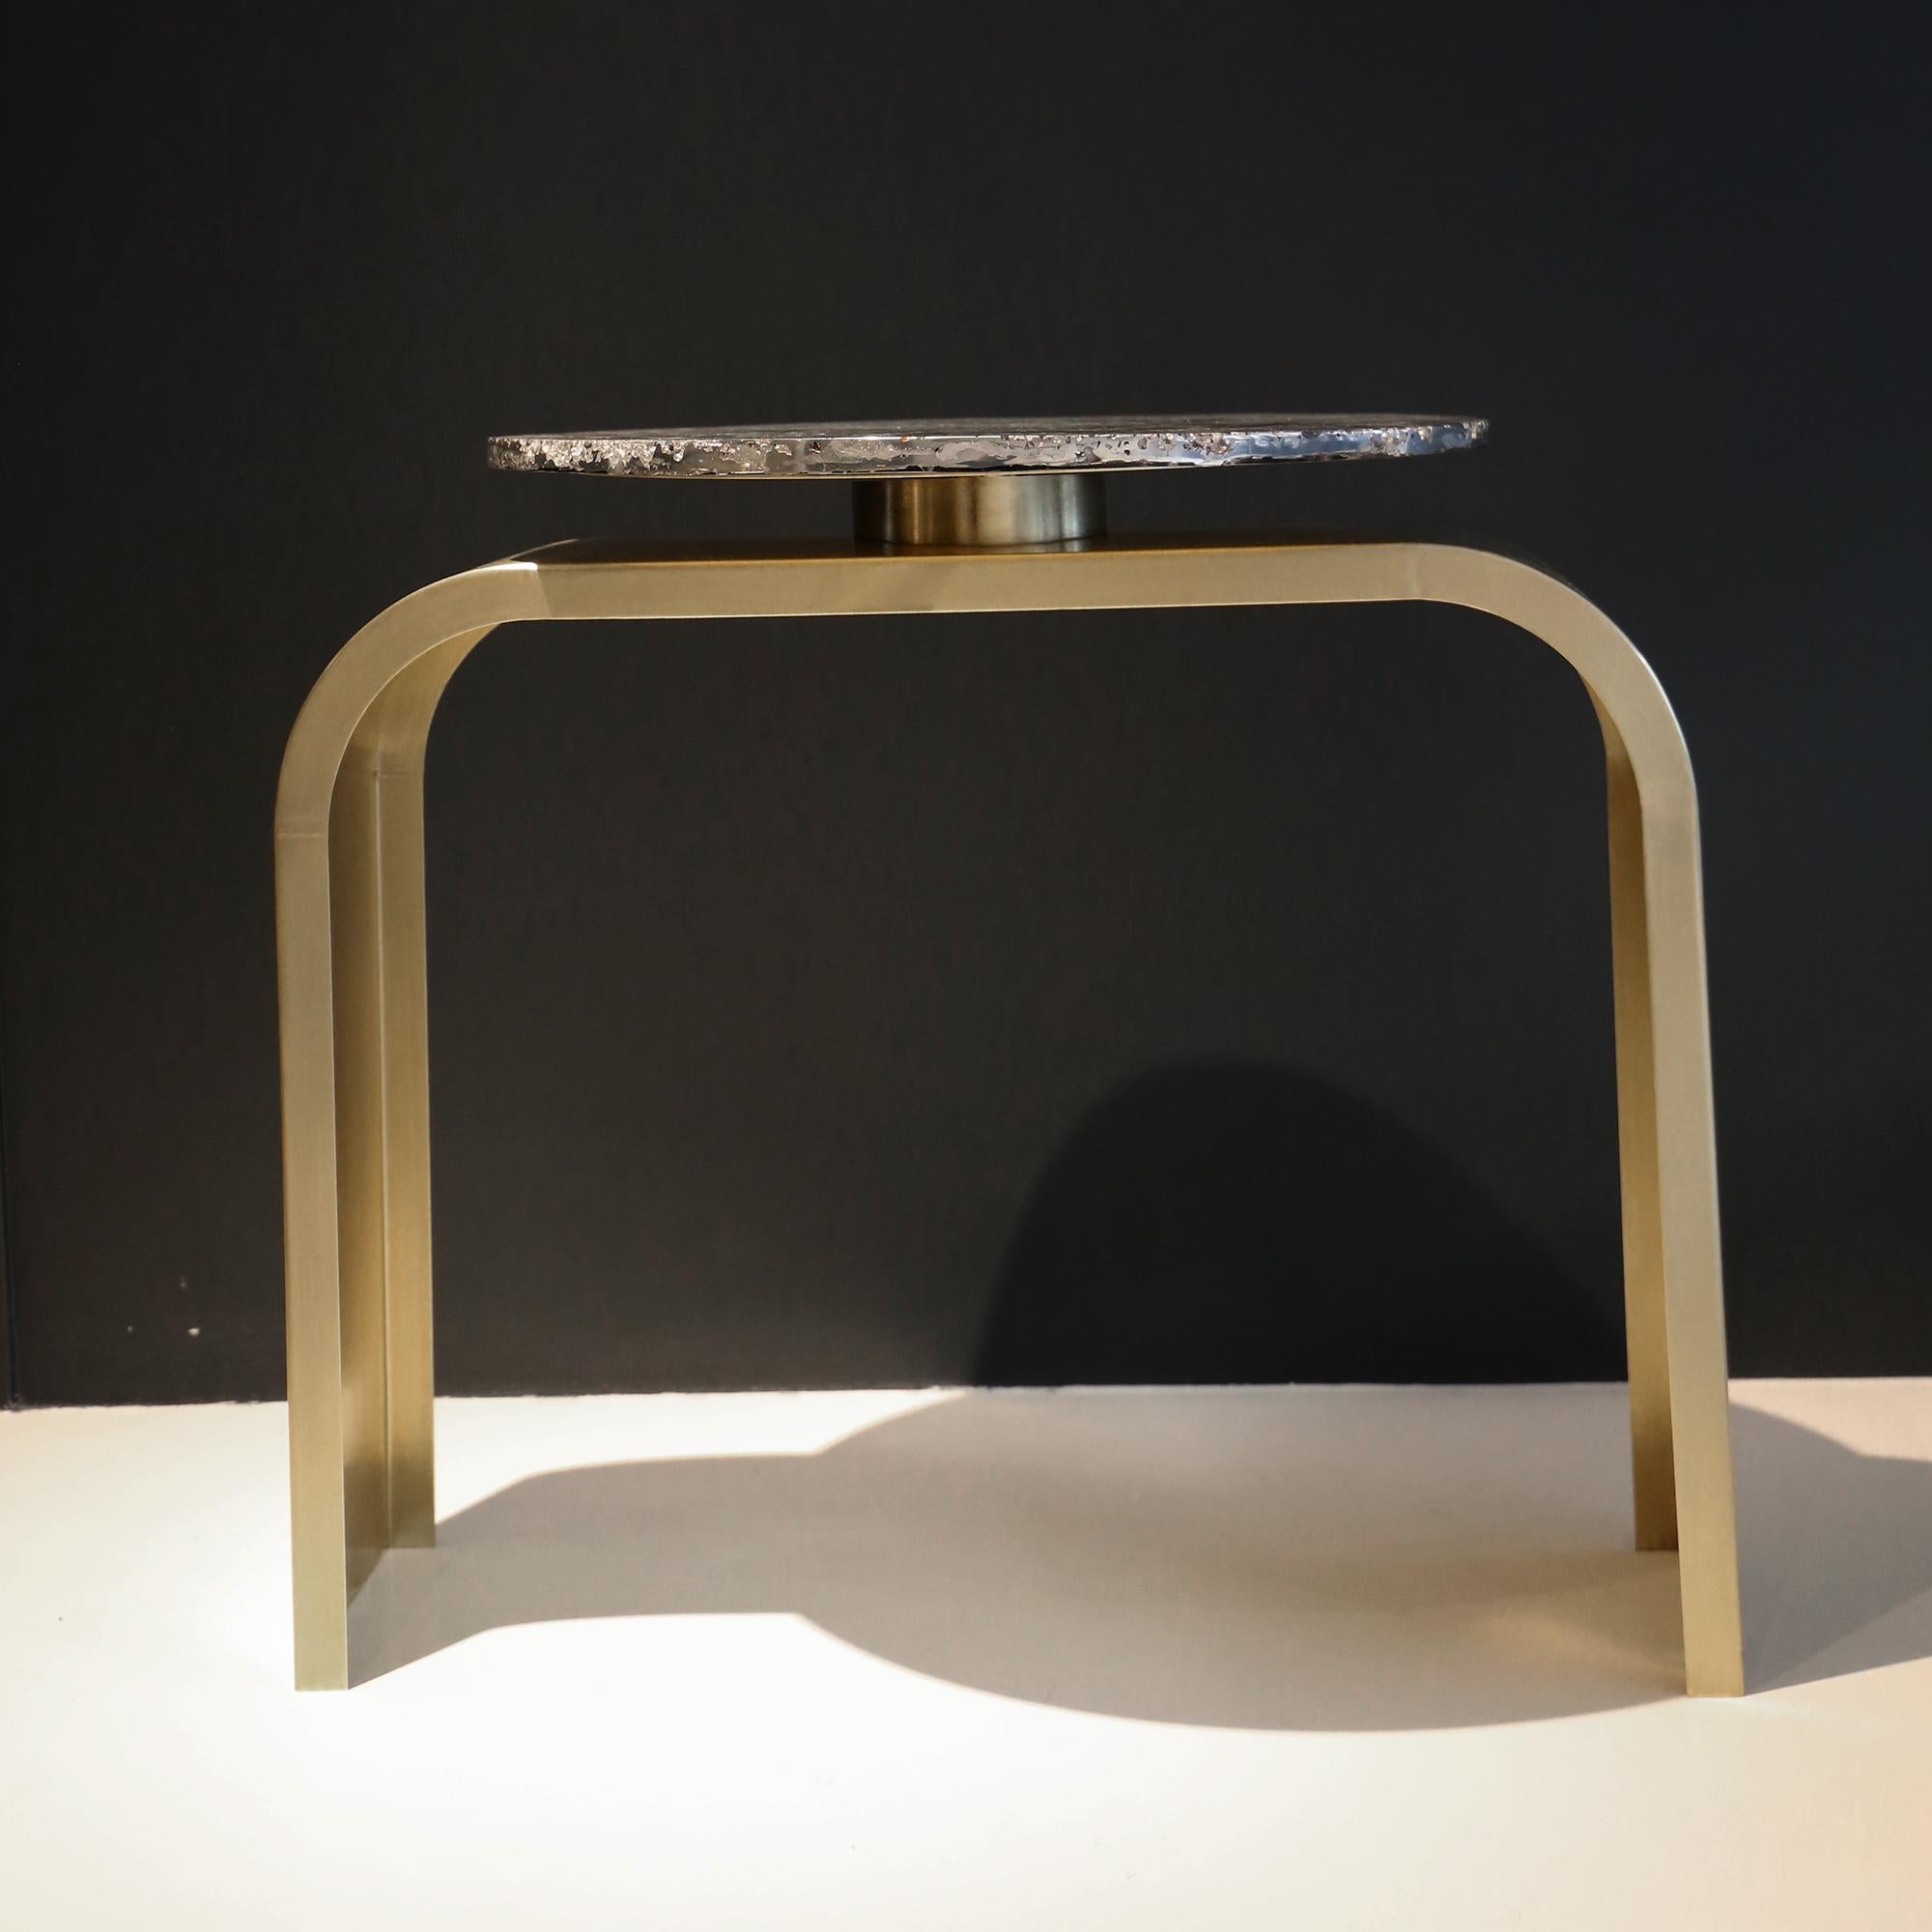 Made to order: This contemporary table is a unique piece, created by Xavier Lavergne and made of melted pewter with scales design, embedded in resin and polished like a marble. The table bronze legs are created in France and handmade in Africa with